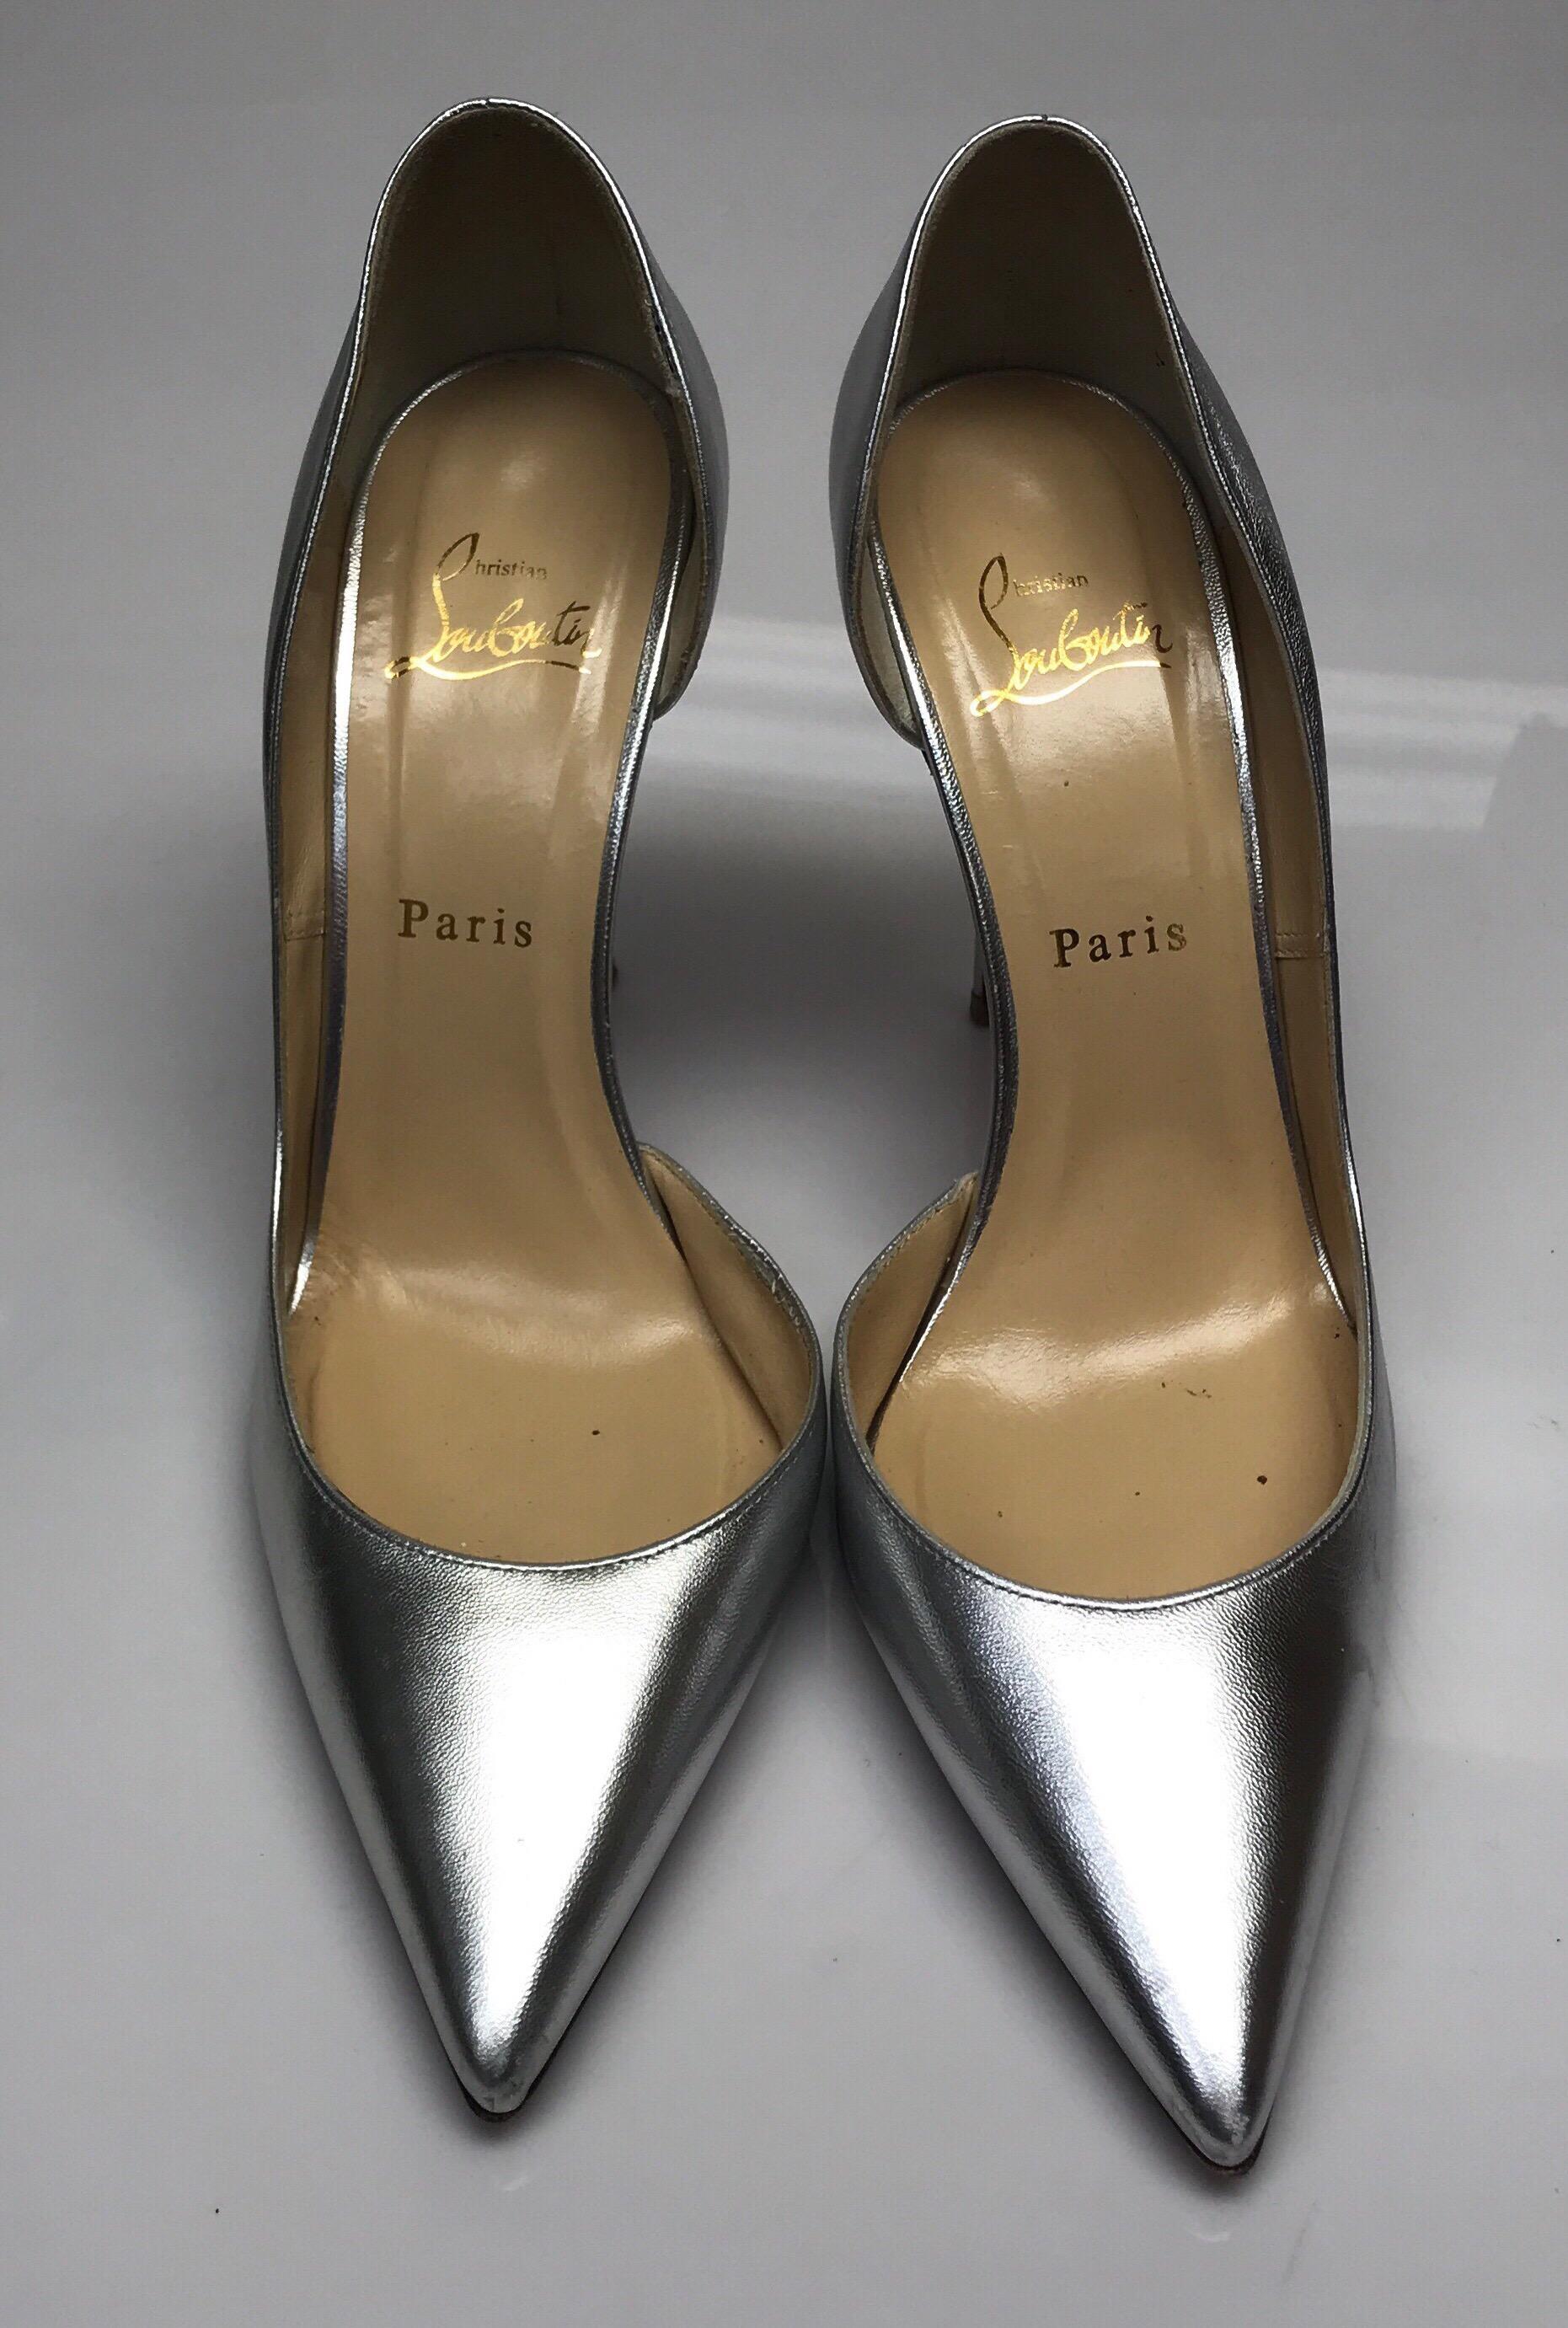 CHRISTIAN LOUBOUTIN Silver D'orsay Shoes-39.5. These amazing Christian Louboutin heels are in great condition. They show wear consistent with use. The red bottoms have slightly rubbed away and the leather has very small smudges in it. These shoes